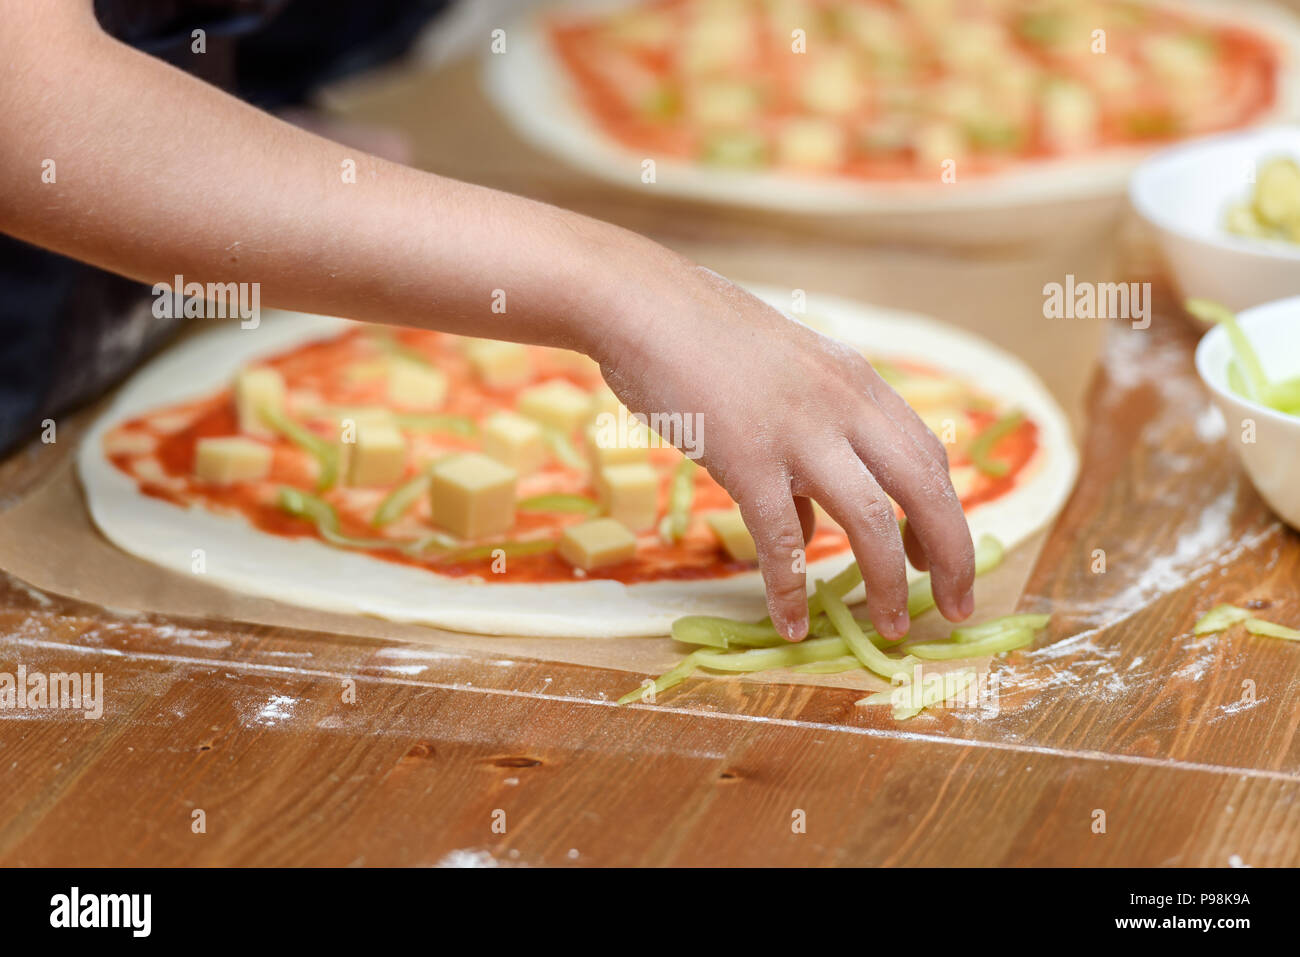 Close-up of children's hands preparing pizza. Children lay out on the basis of pizza vegetables and cheese Stock Photo